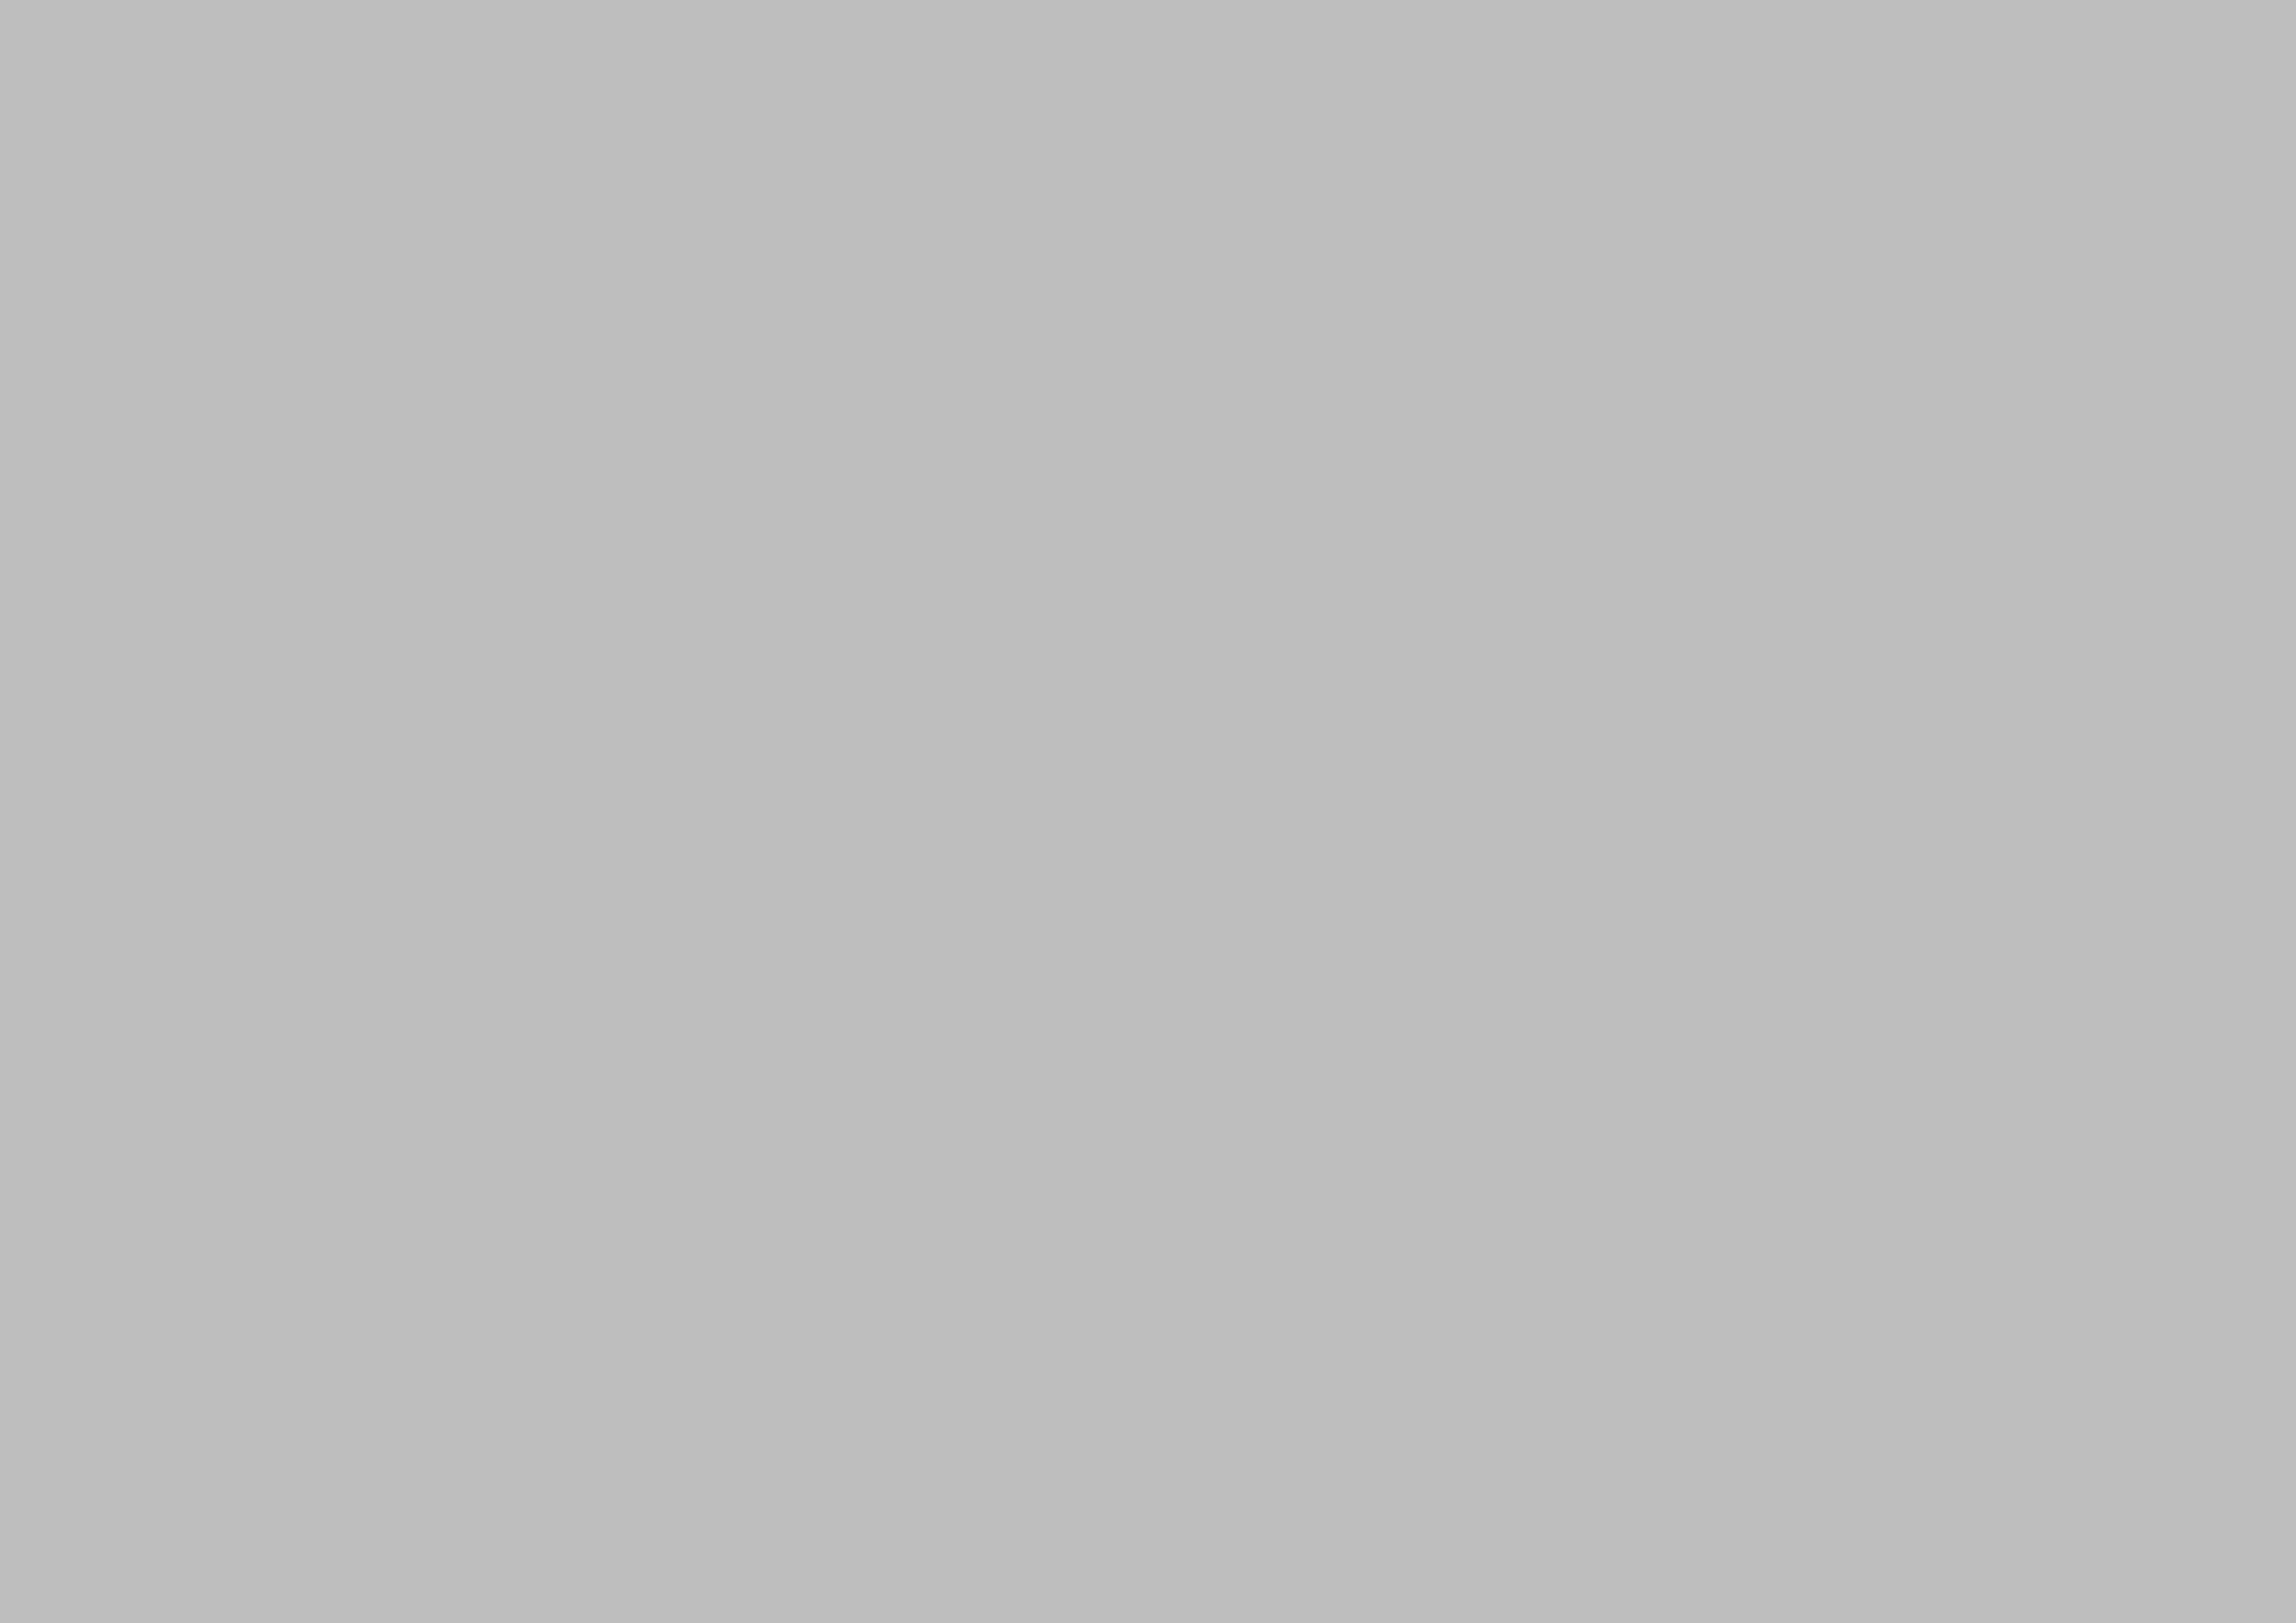 3508x2480 Gray X11 Gui Gray Solid Color Background